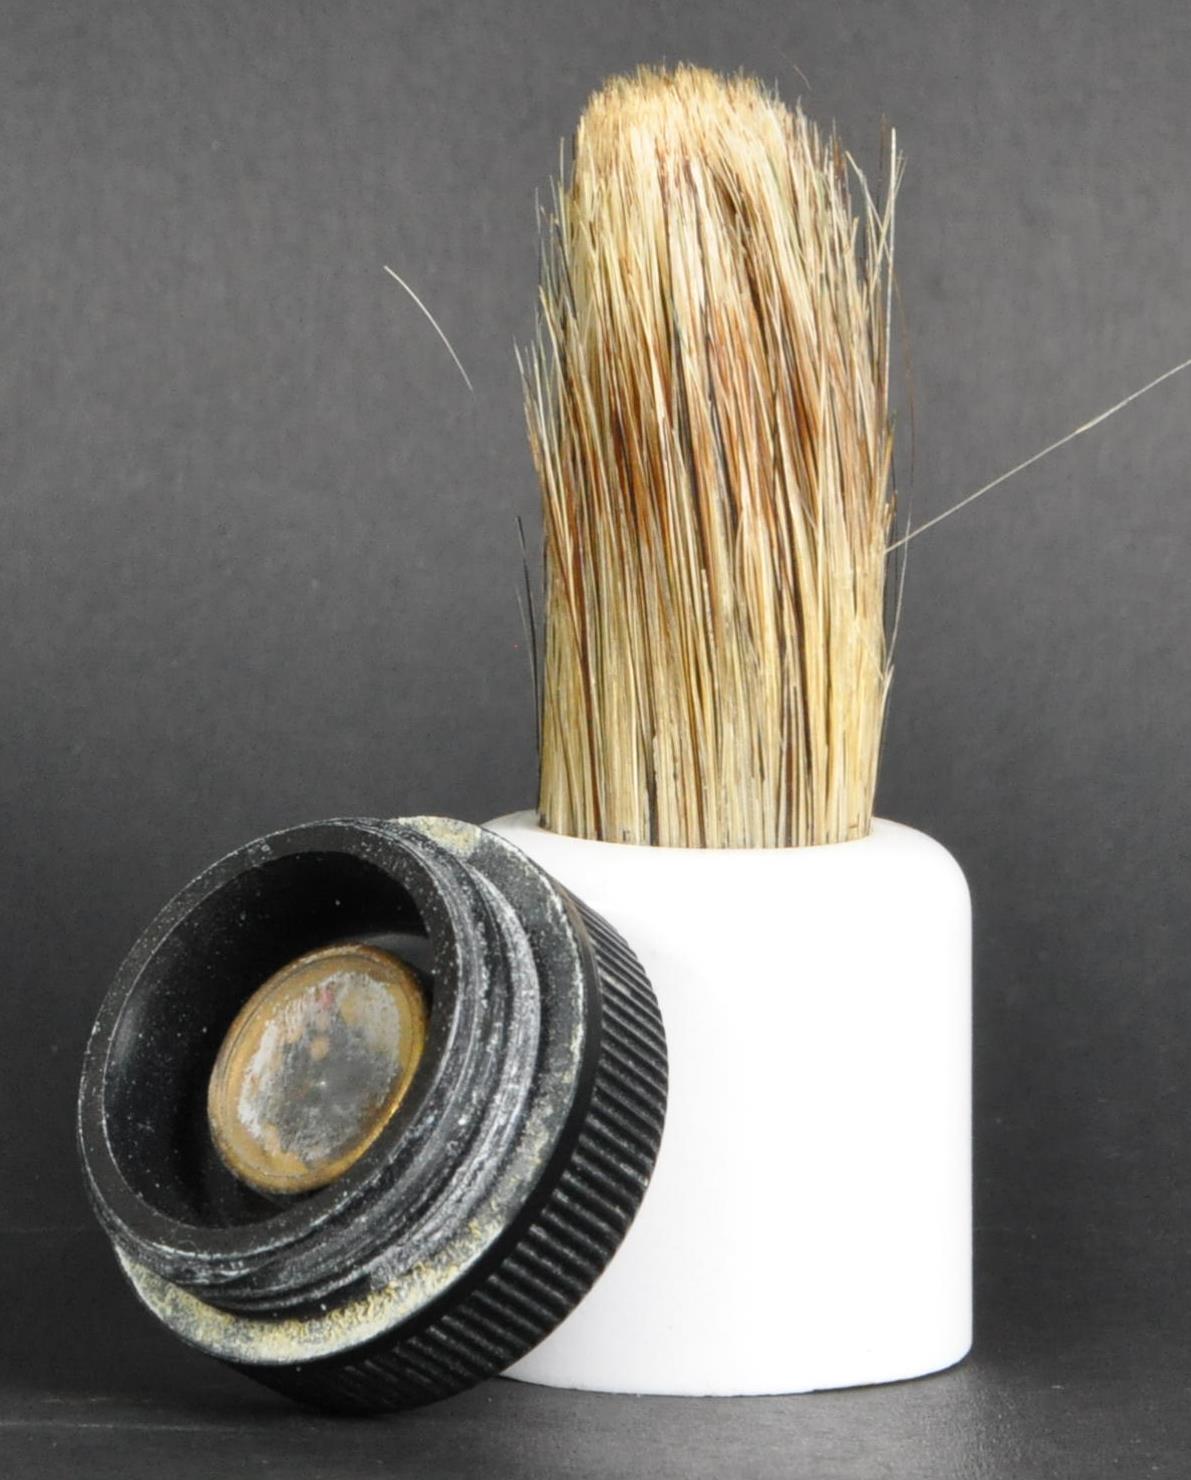 WWII SECOND WORLD WAR - ESCAPE & EVADE - SHAVING BRUSH WITH HIDDEN COMPASS